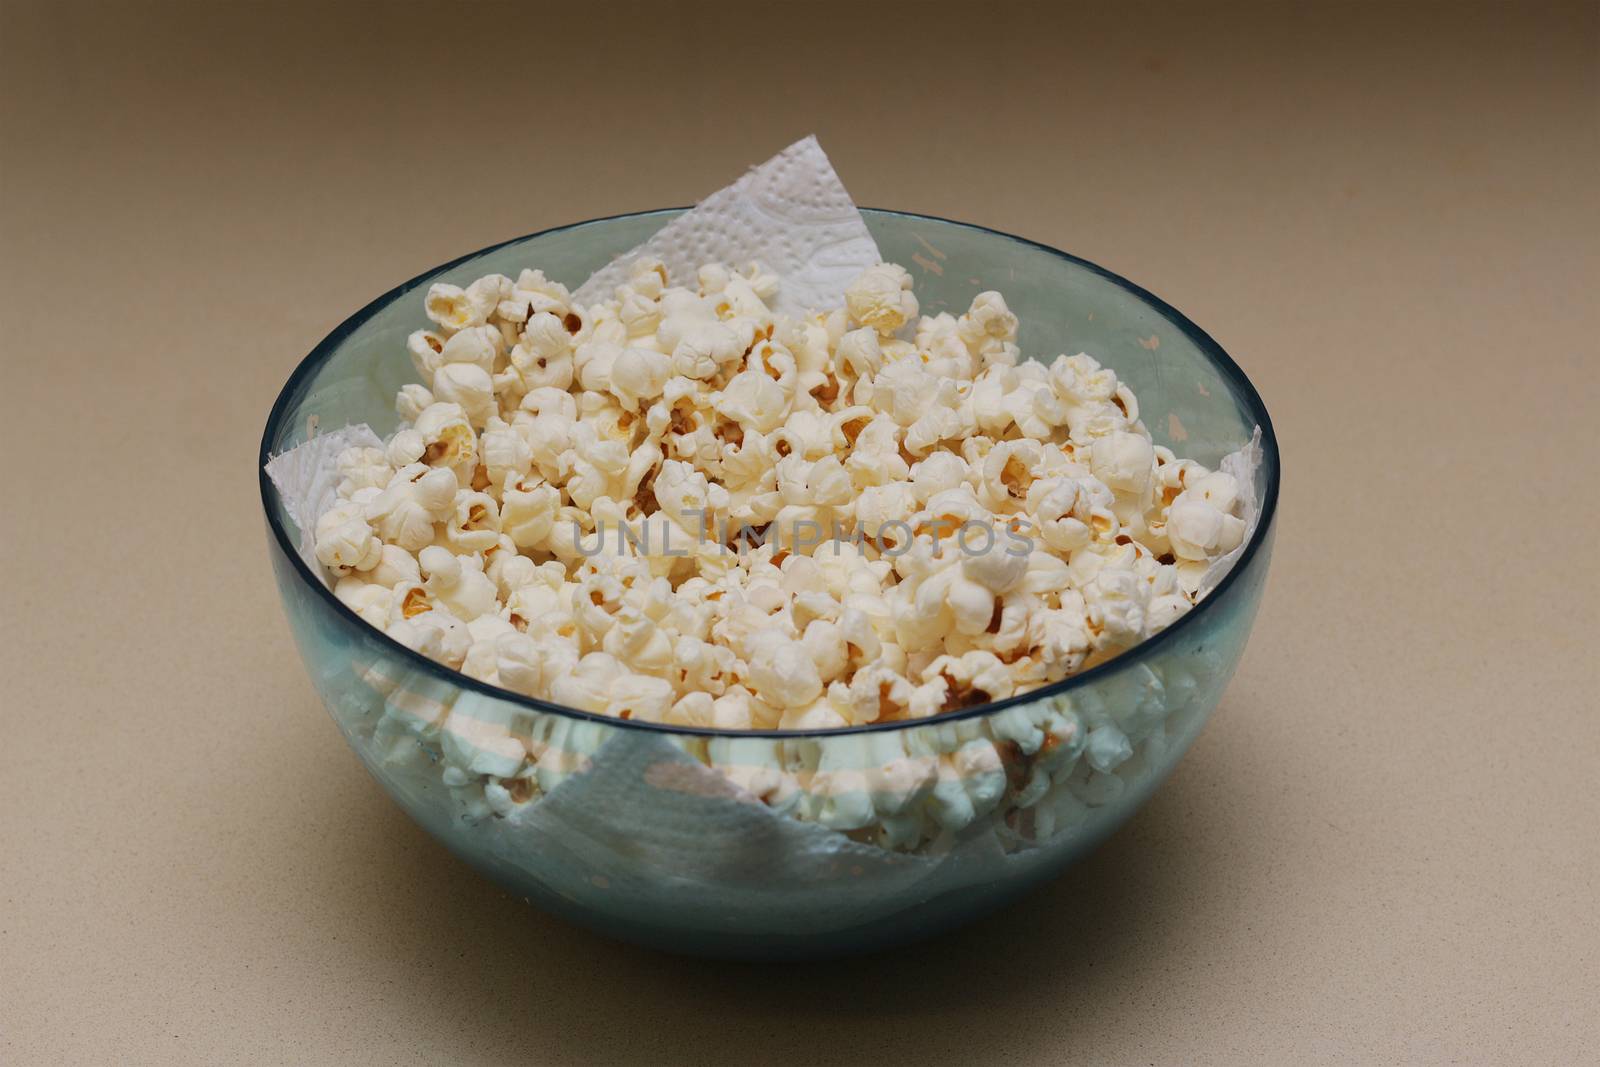 Popcorn in a bowl by HD_premium_shots